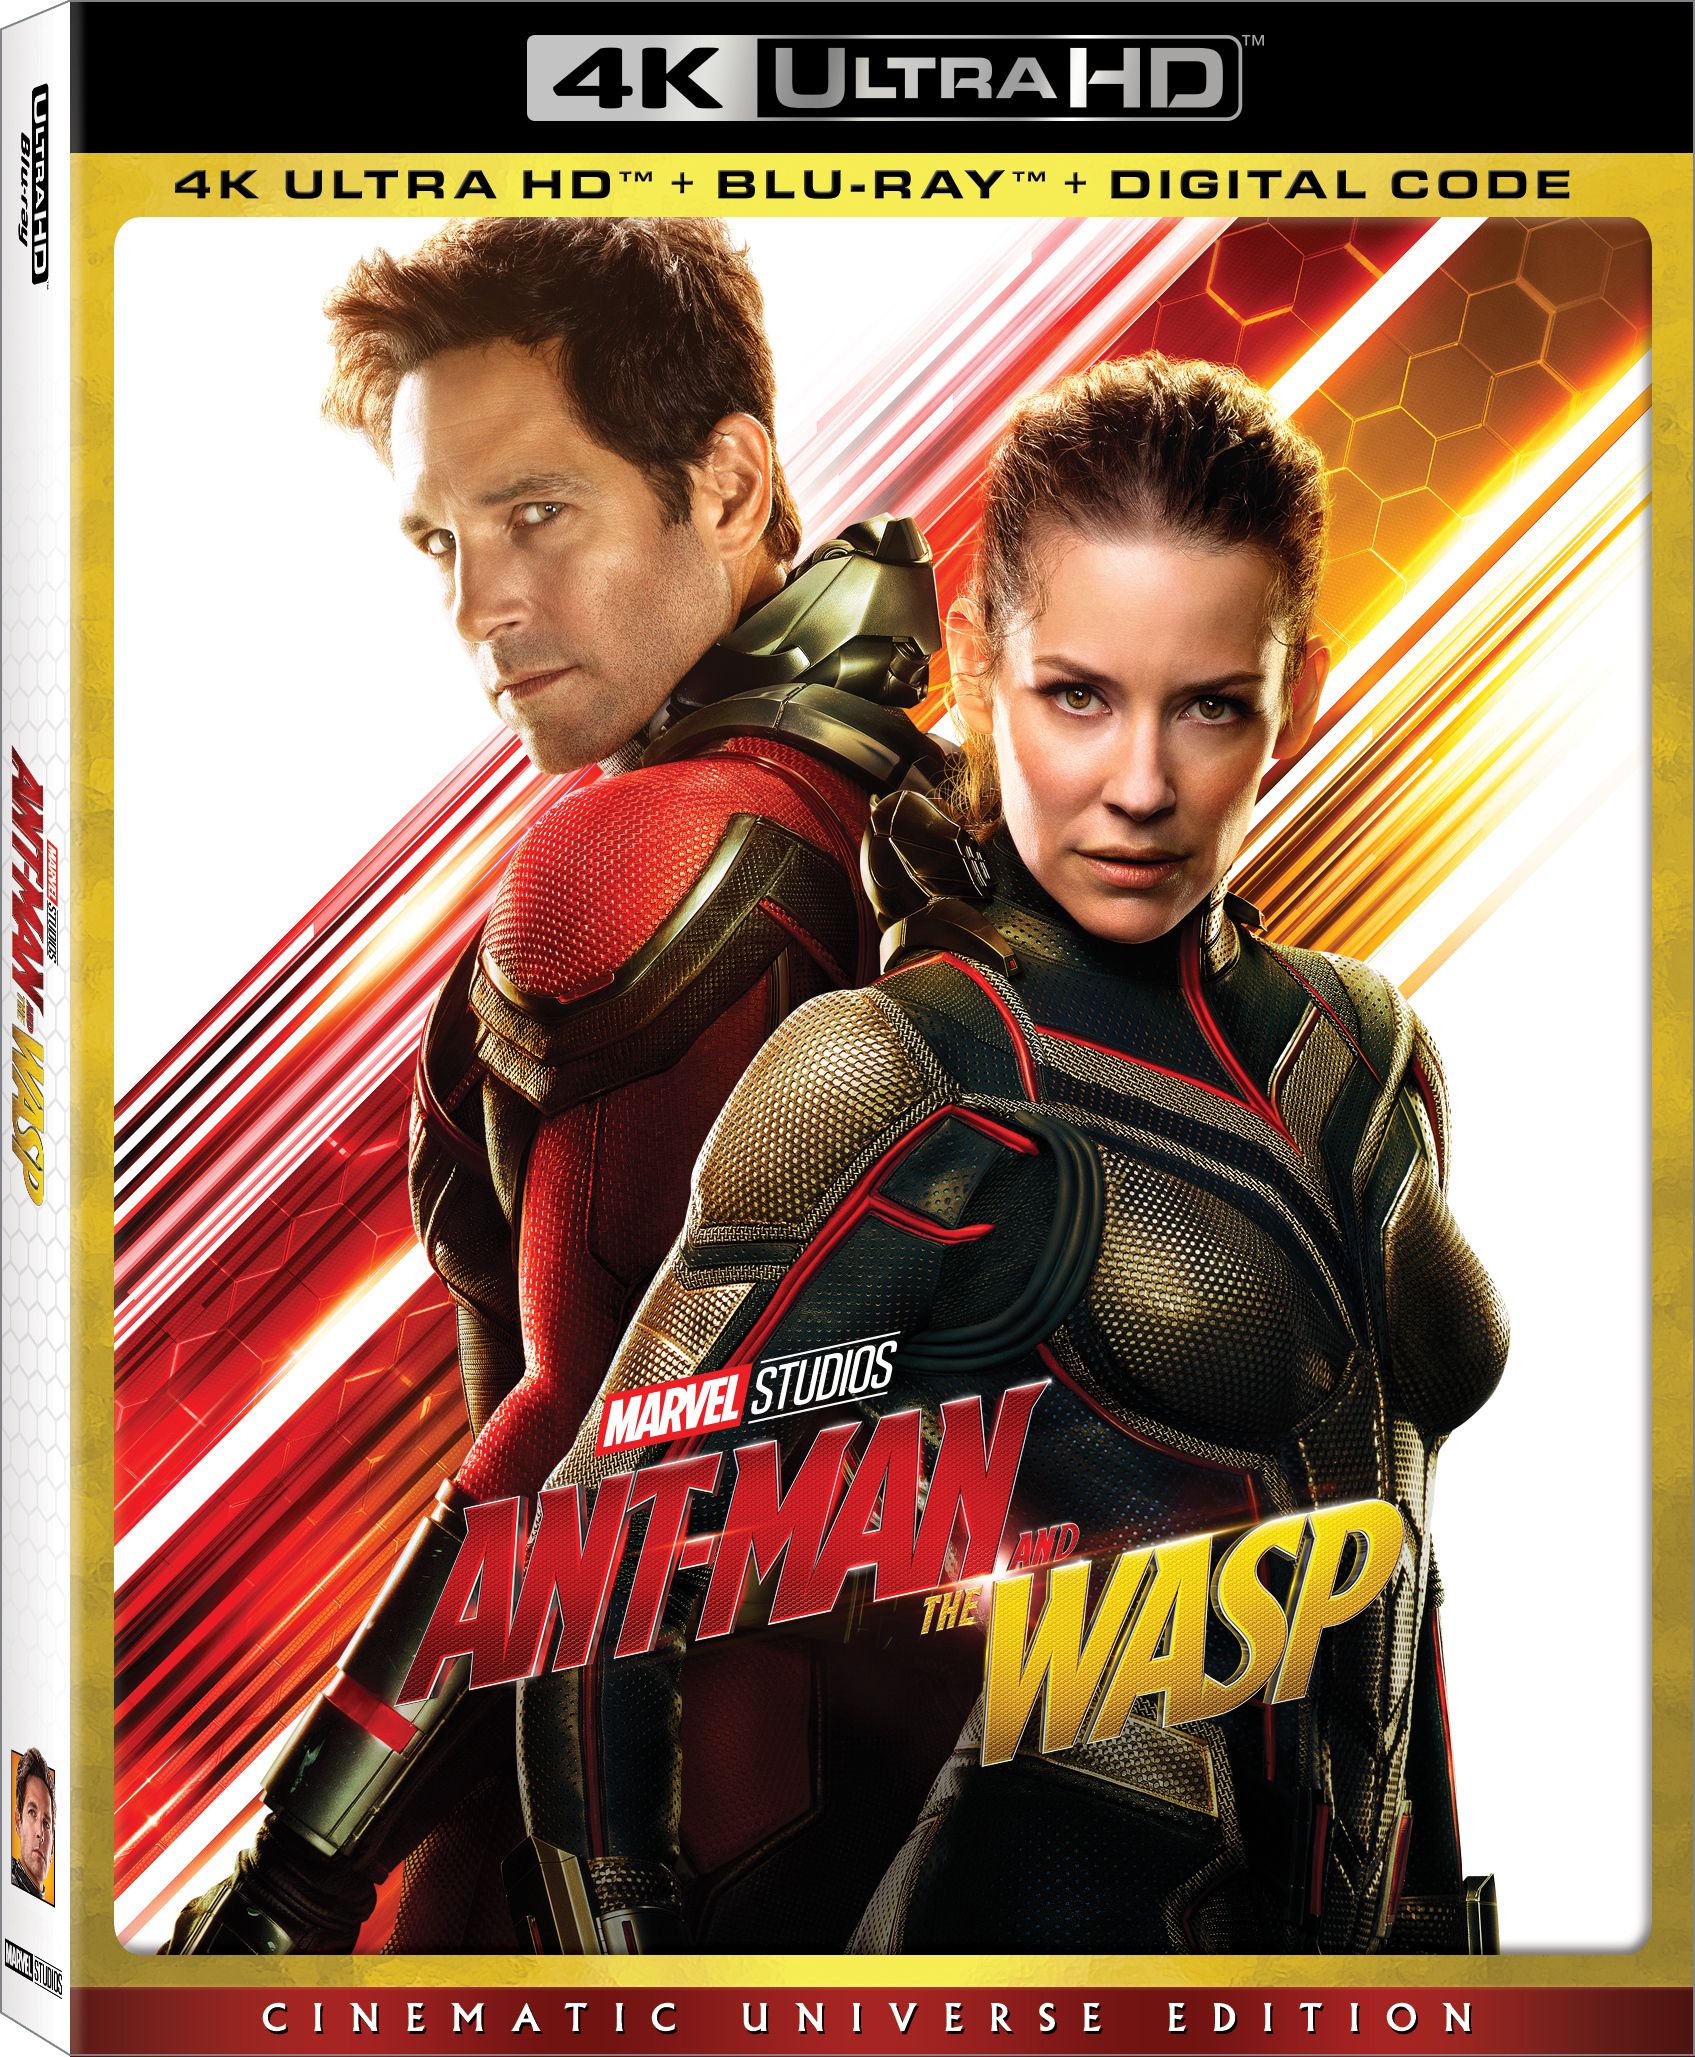 Ant-Man and the Wasp Blu-ray art